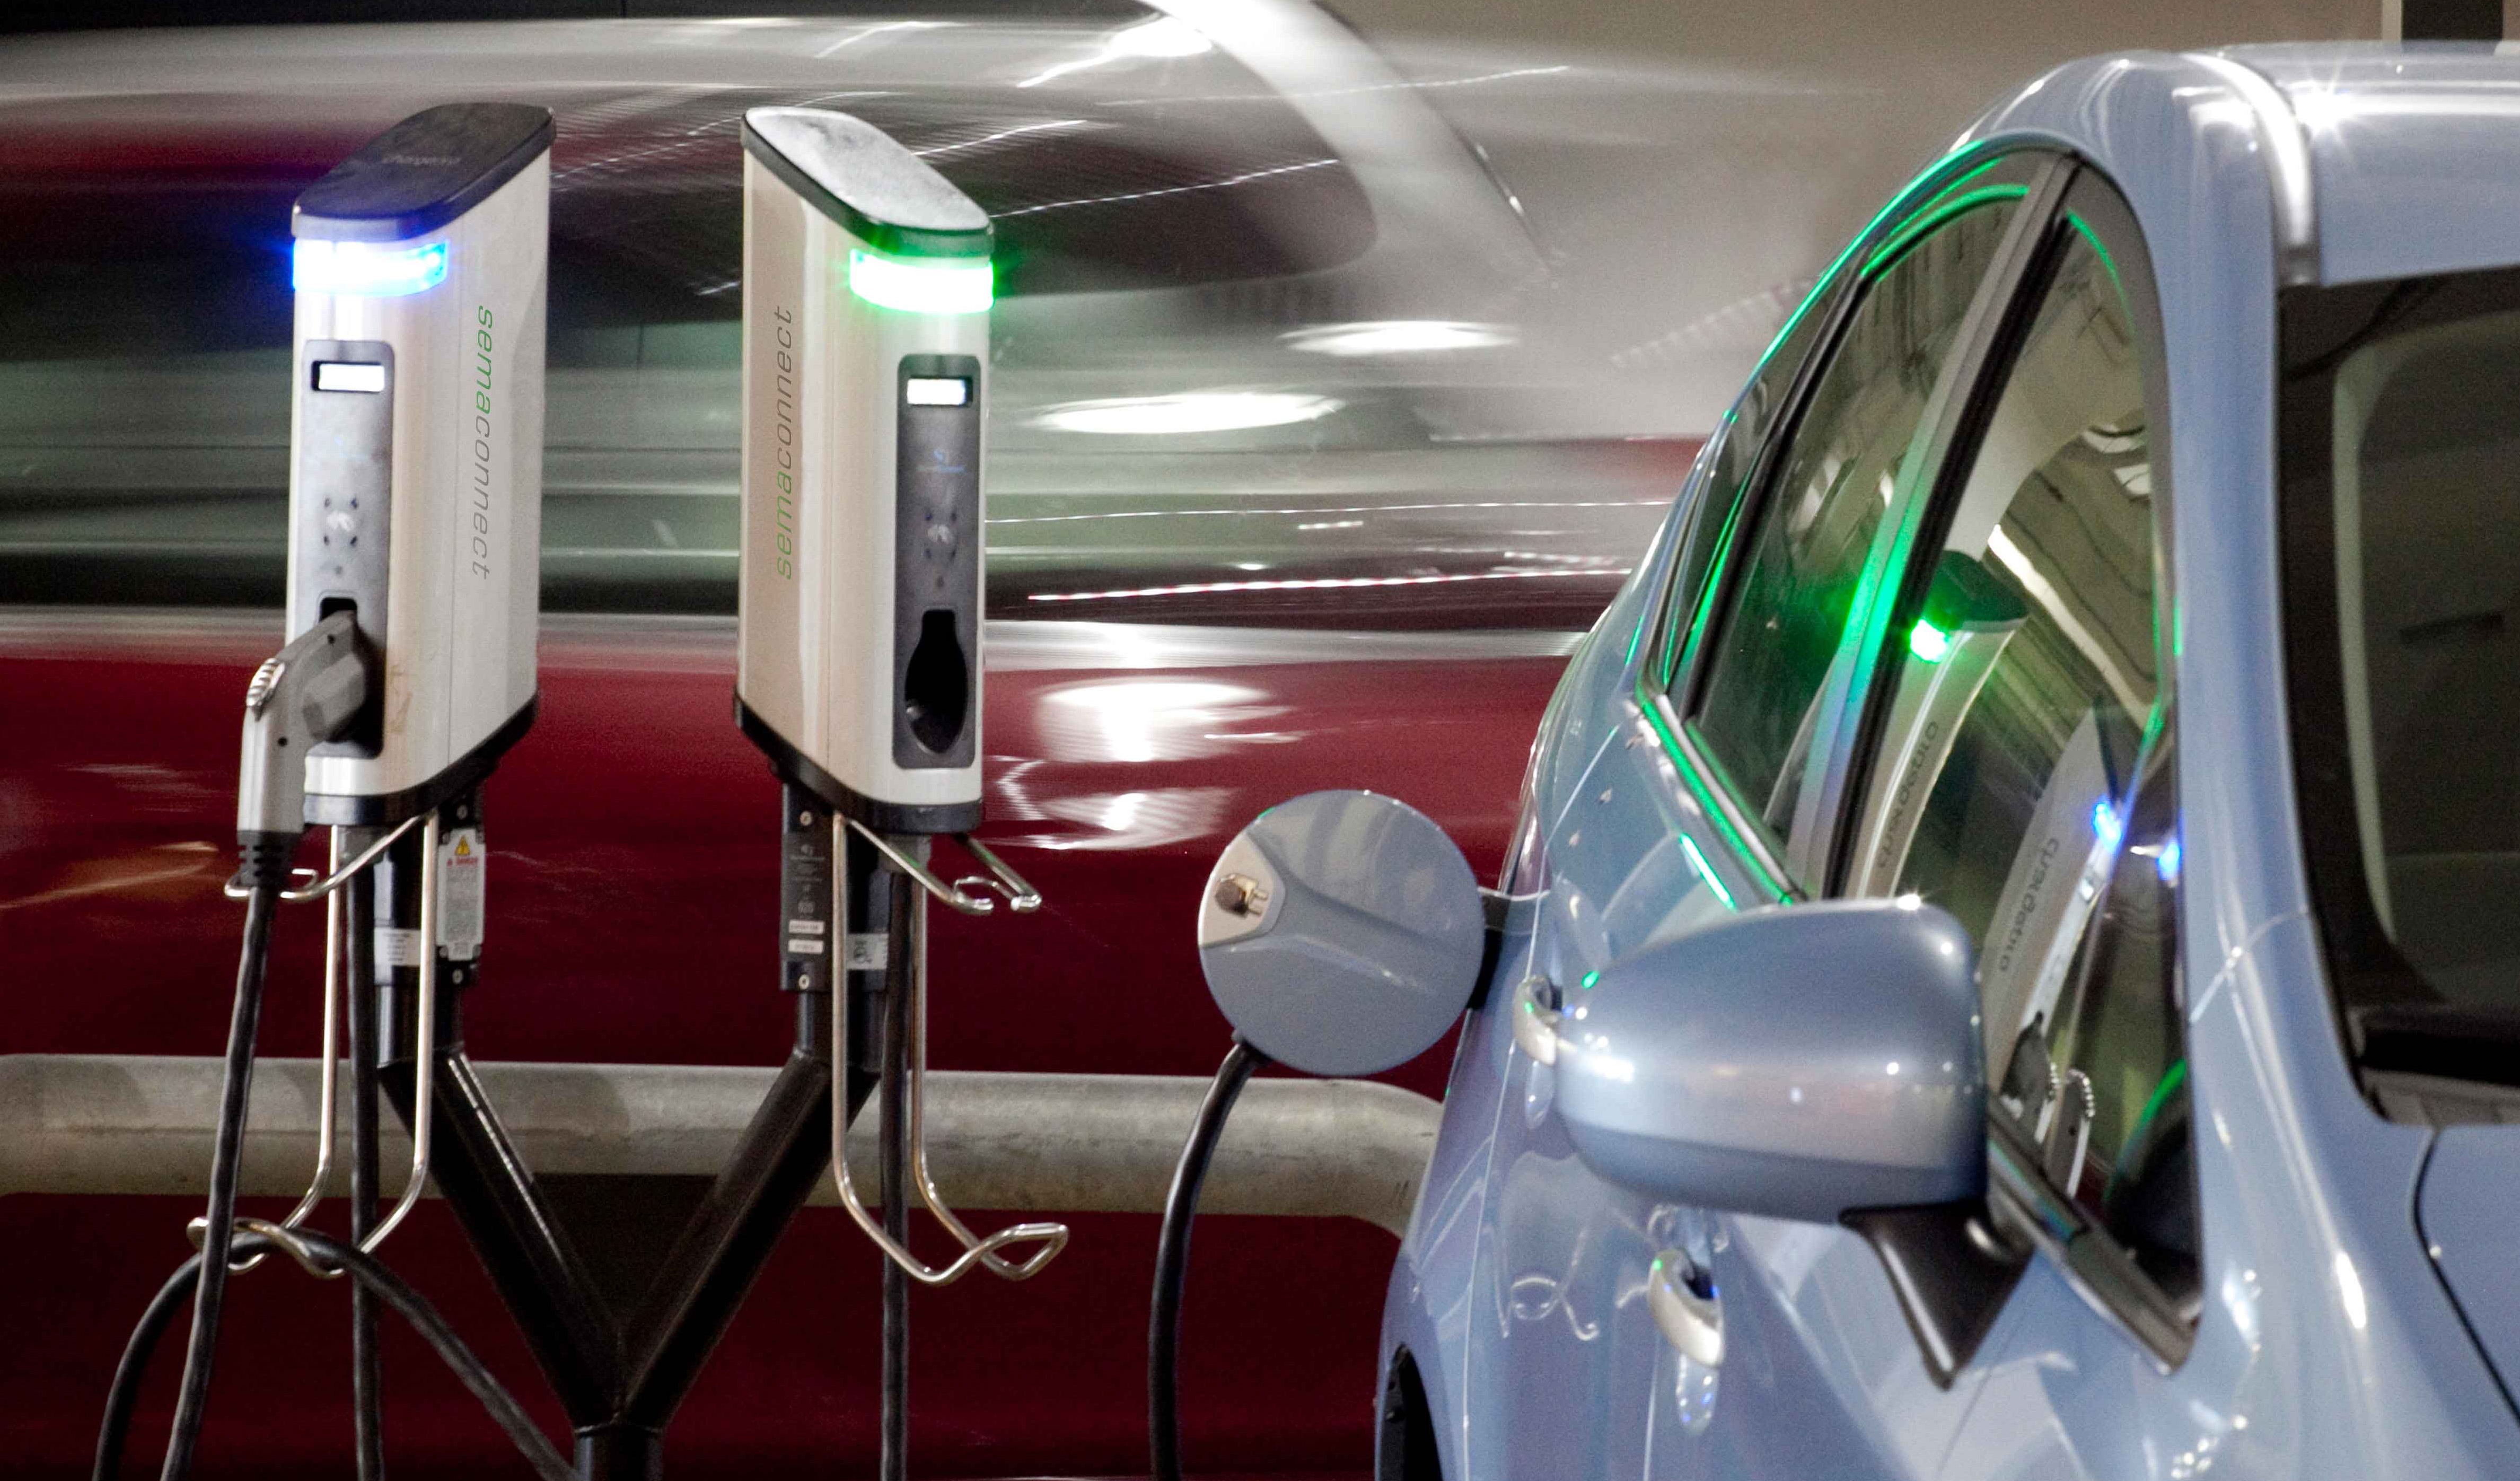 Commentary: Maryland can accelerate jobs and cleaner environment with EV charging stations